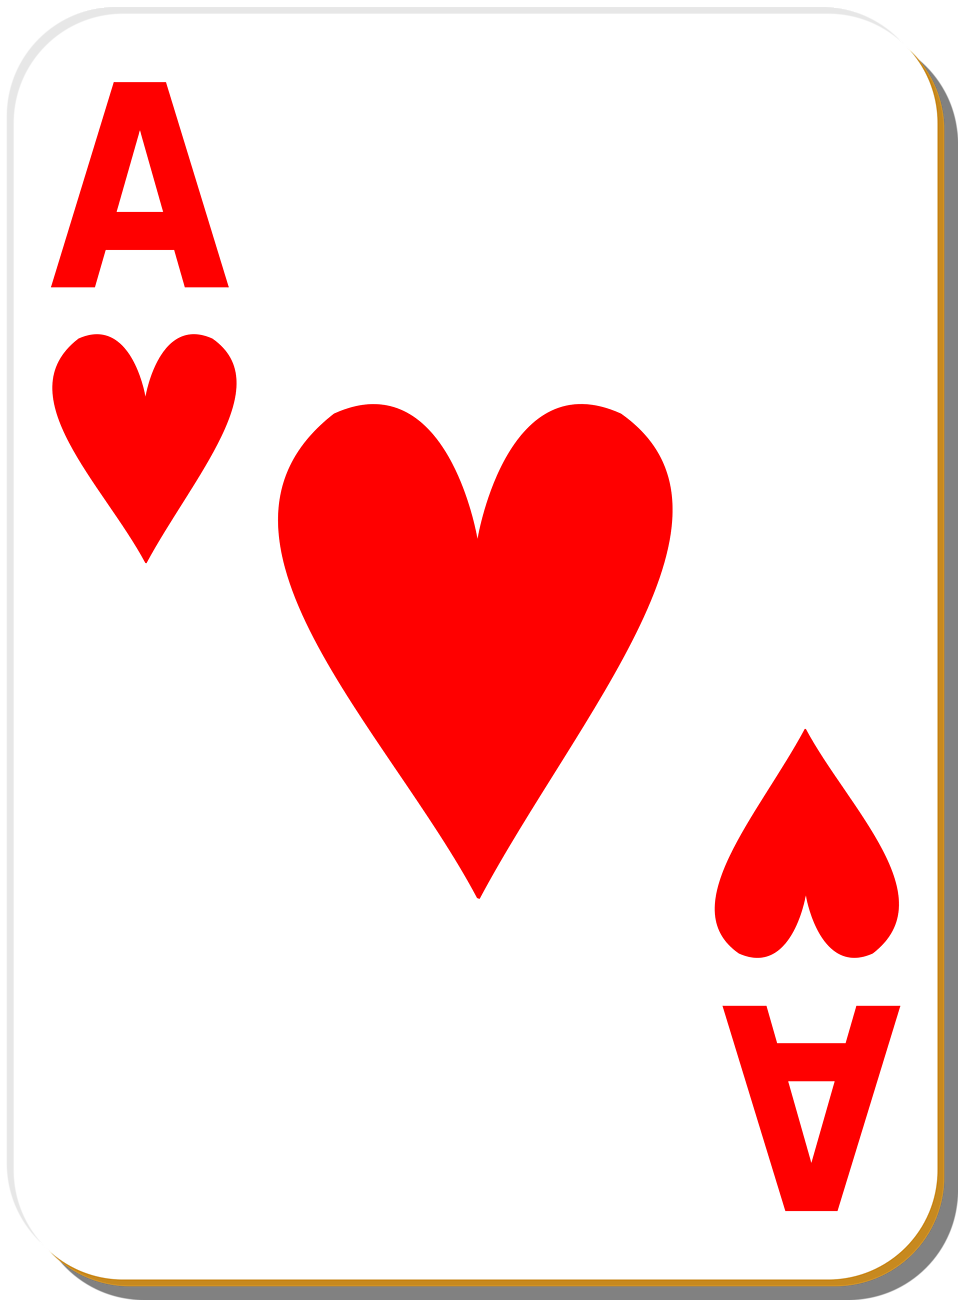 Playing Card   Free Stock Photo   Illustration Of An Ace Of Hearts